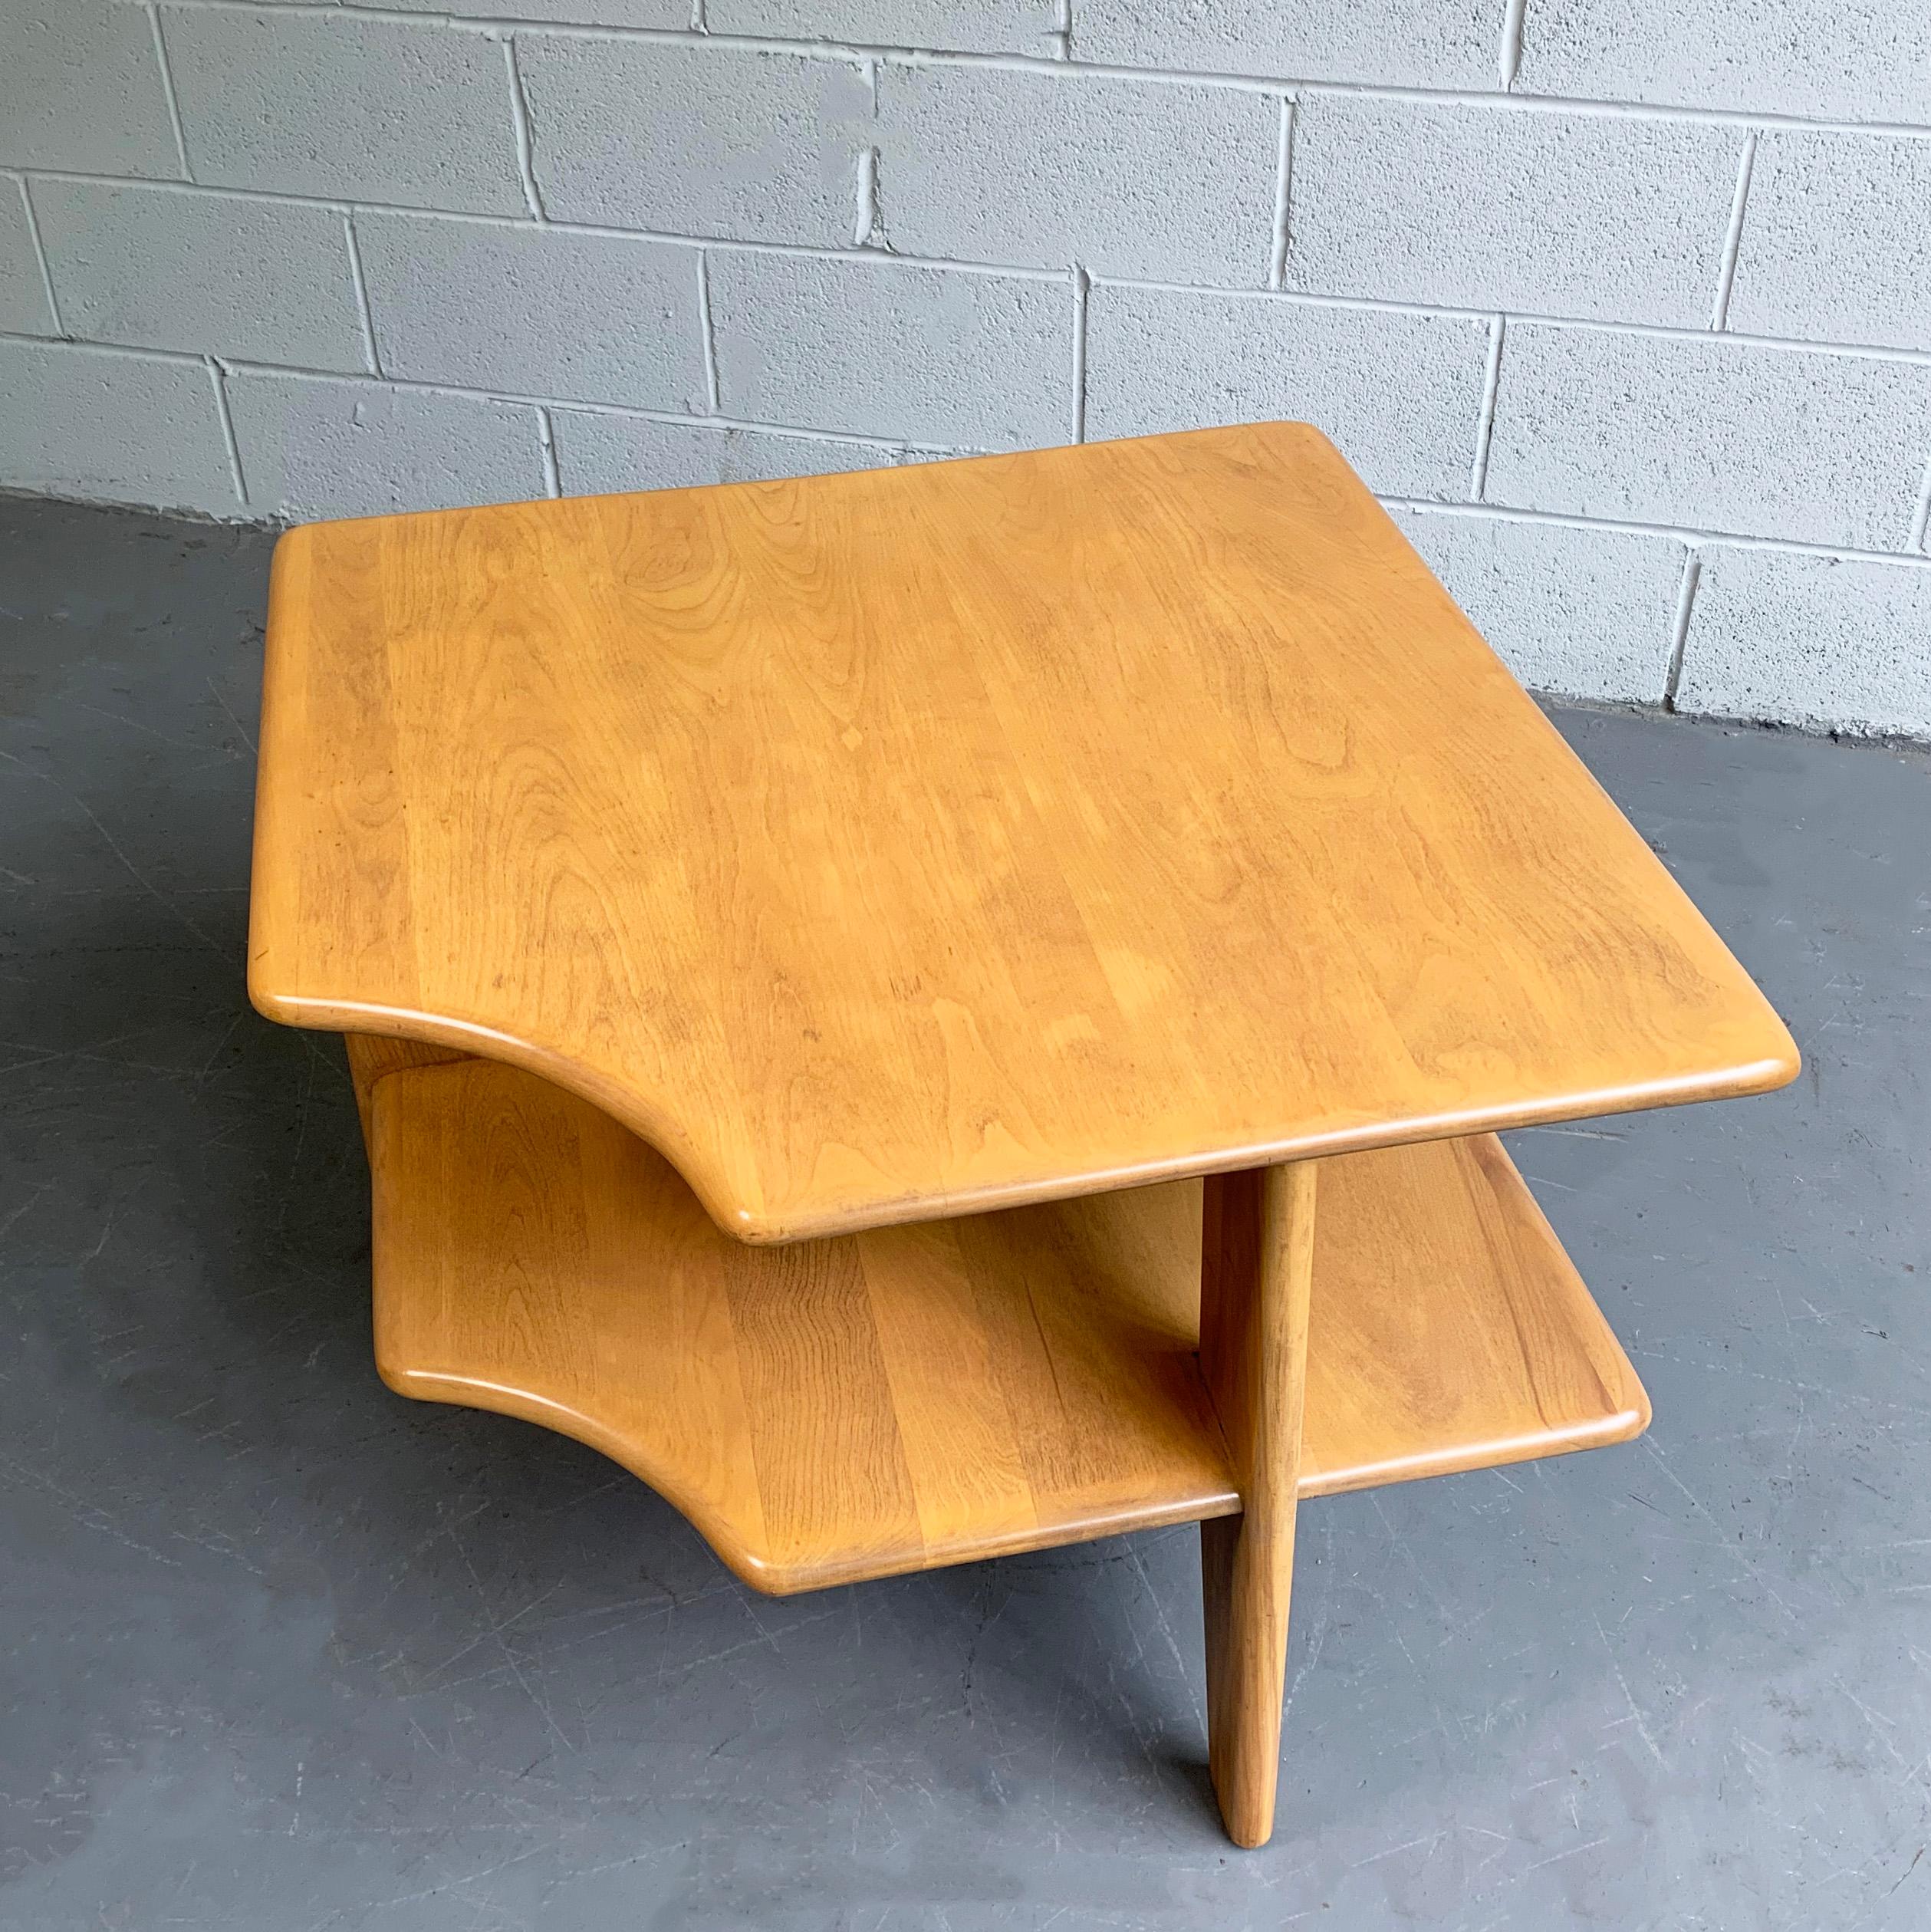 Sculptural, Mid-Century Modern, tiered maple, corner side table by Russel Wright for Conant ball features a carved edge to create a corner in between sofas or chairs. The bottom tier is 12 inches height.